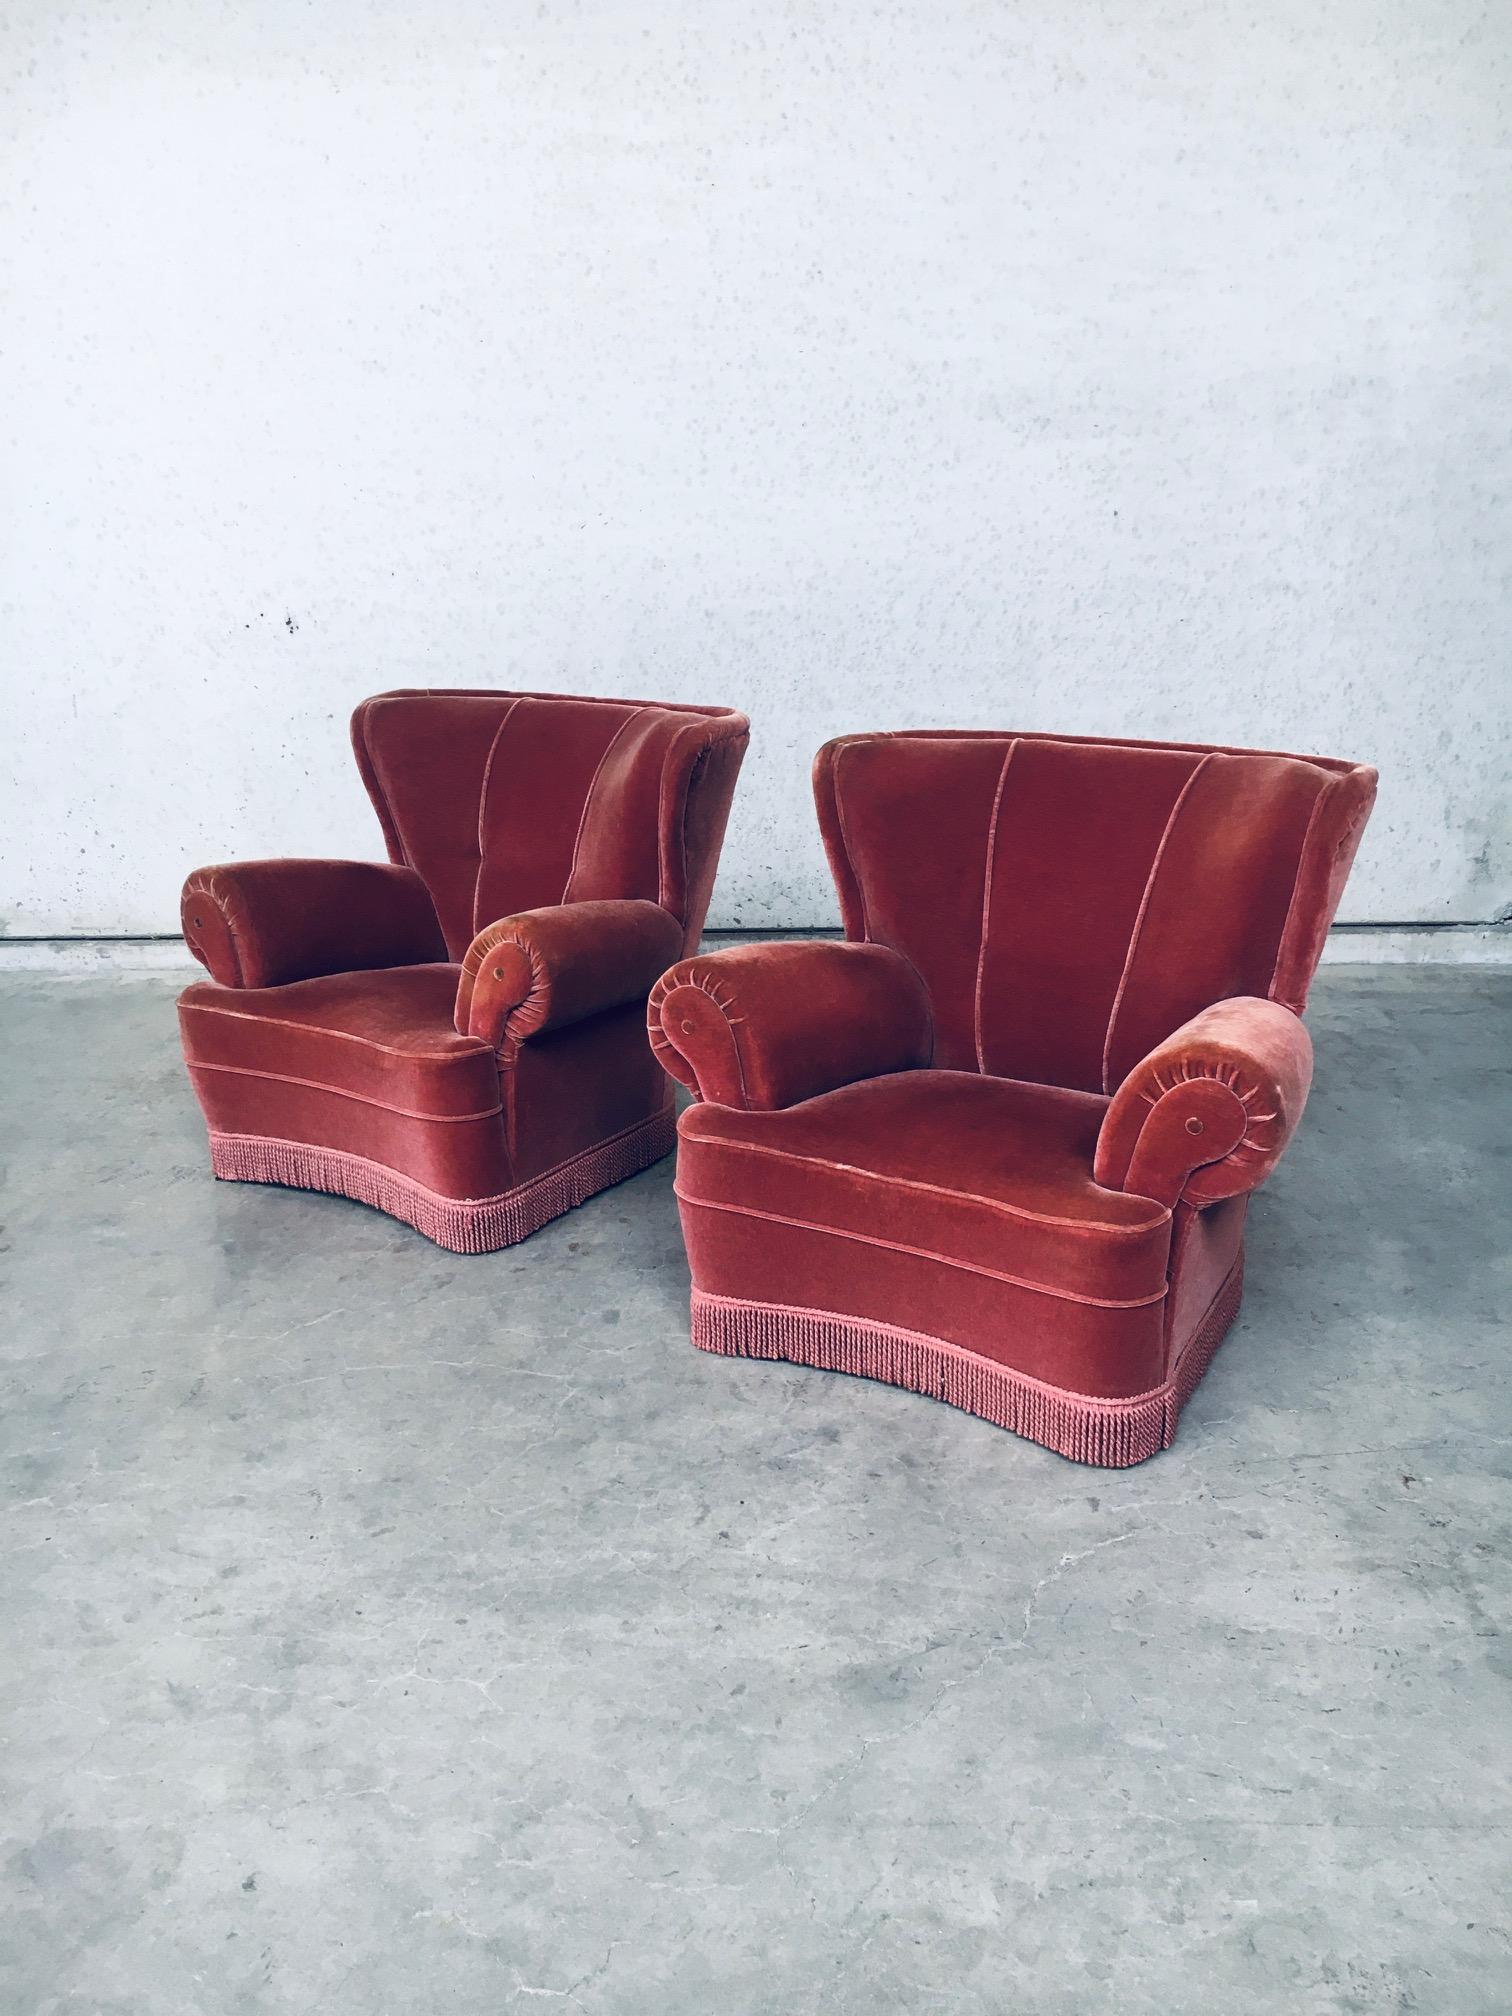 Vintage Art Deco design pink velvet armchair fauteuil Set of 2 with fringe. Made in Italy, 1930s / 40s. Curved large lucious pink velvet lounge chairs with fringed bottom. Spring cushion seating on oak wooden frame. Both chairs are all original and